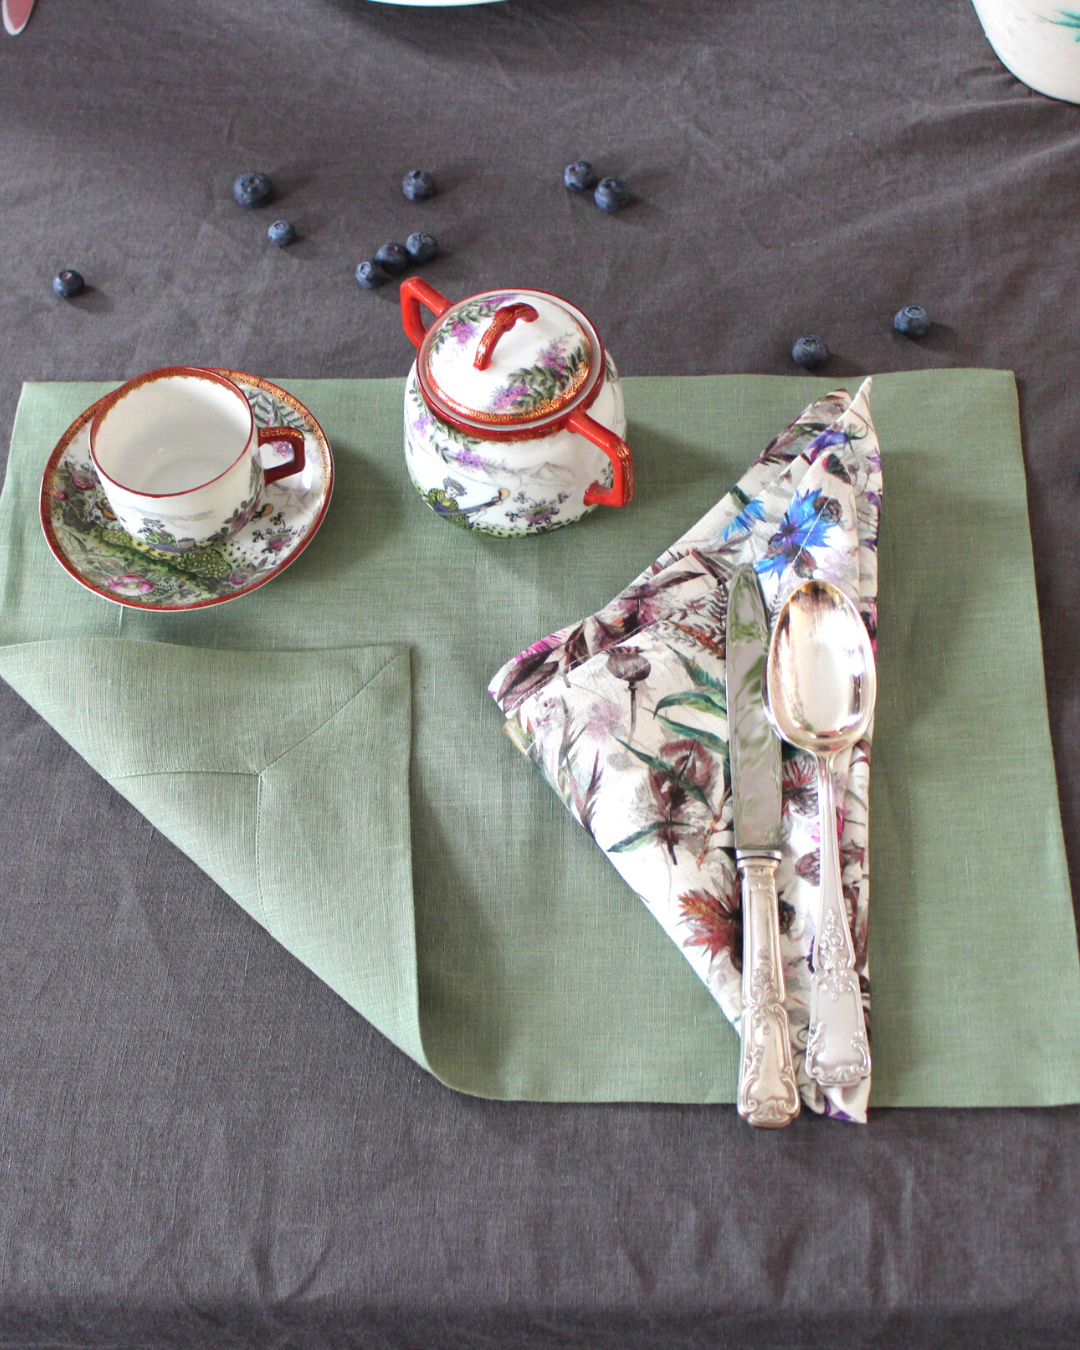 Linen table placemat in Olive